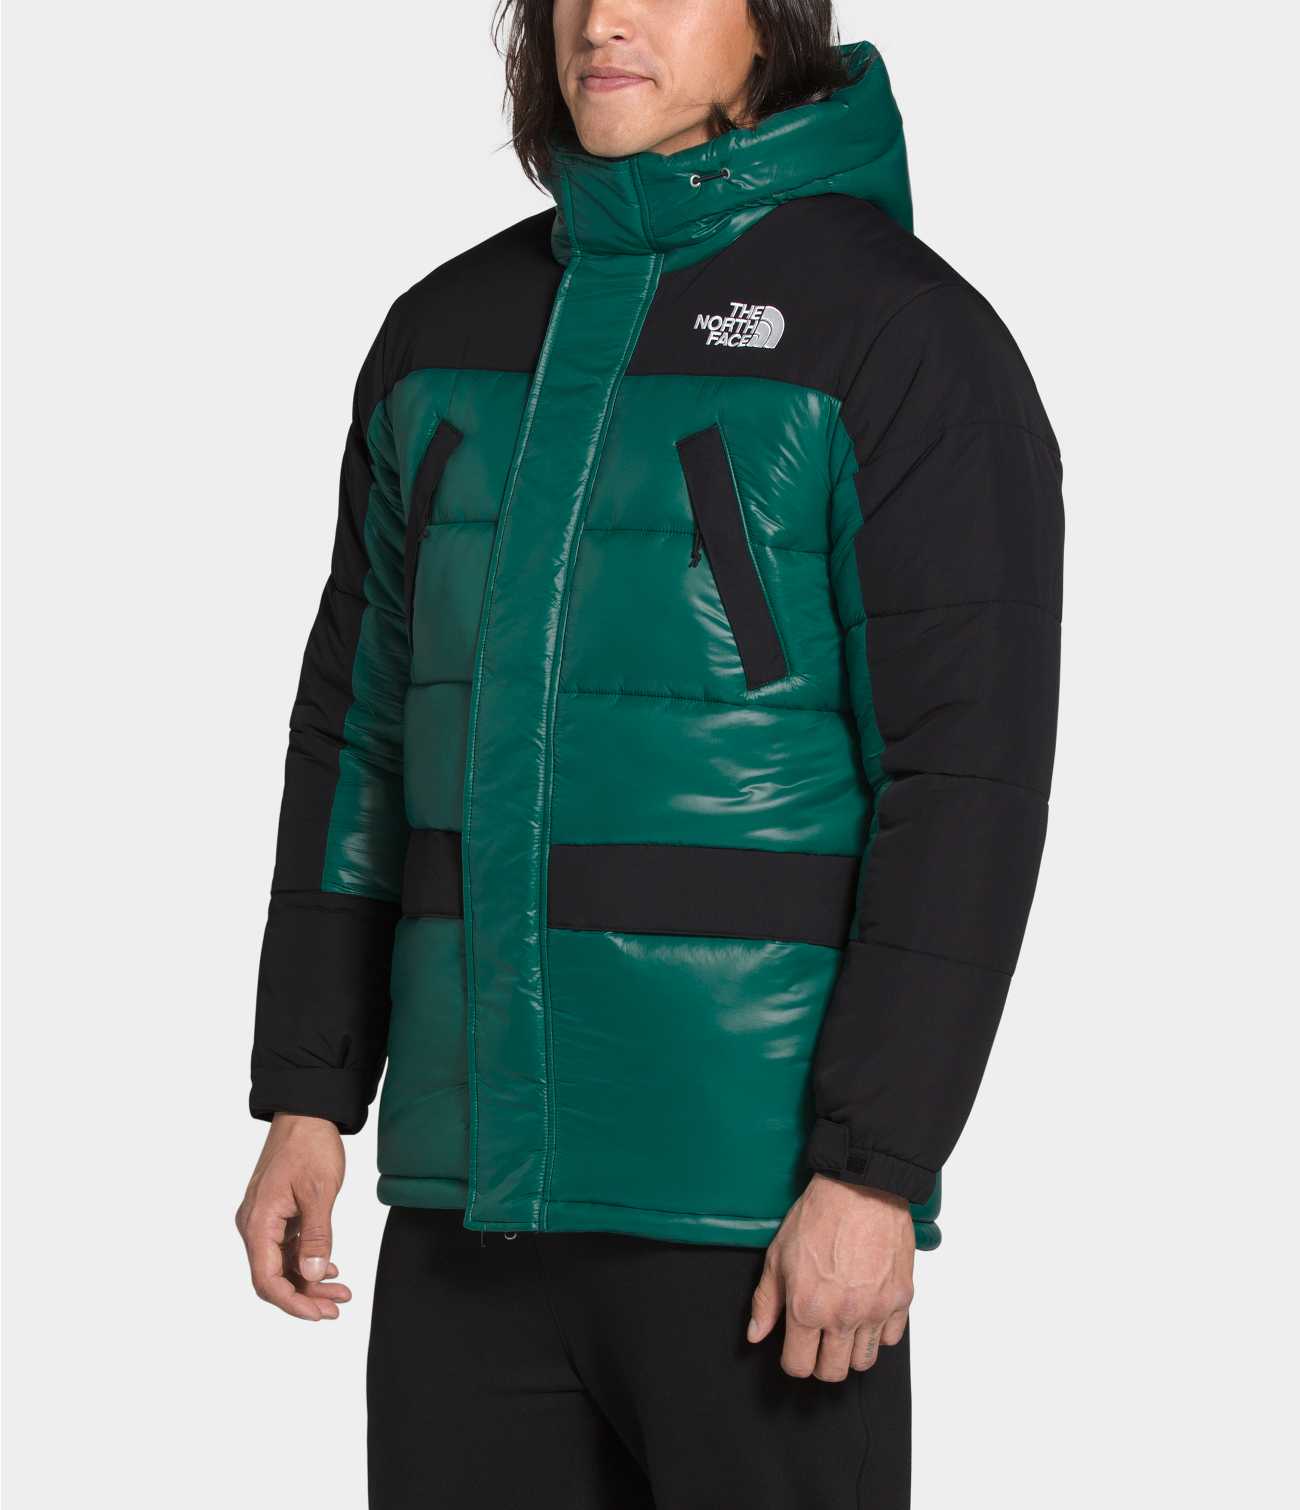 HMLYN INSULATED PARKA, The North Face